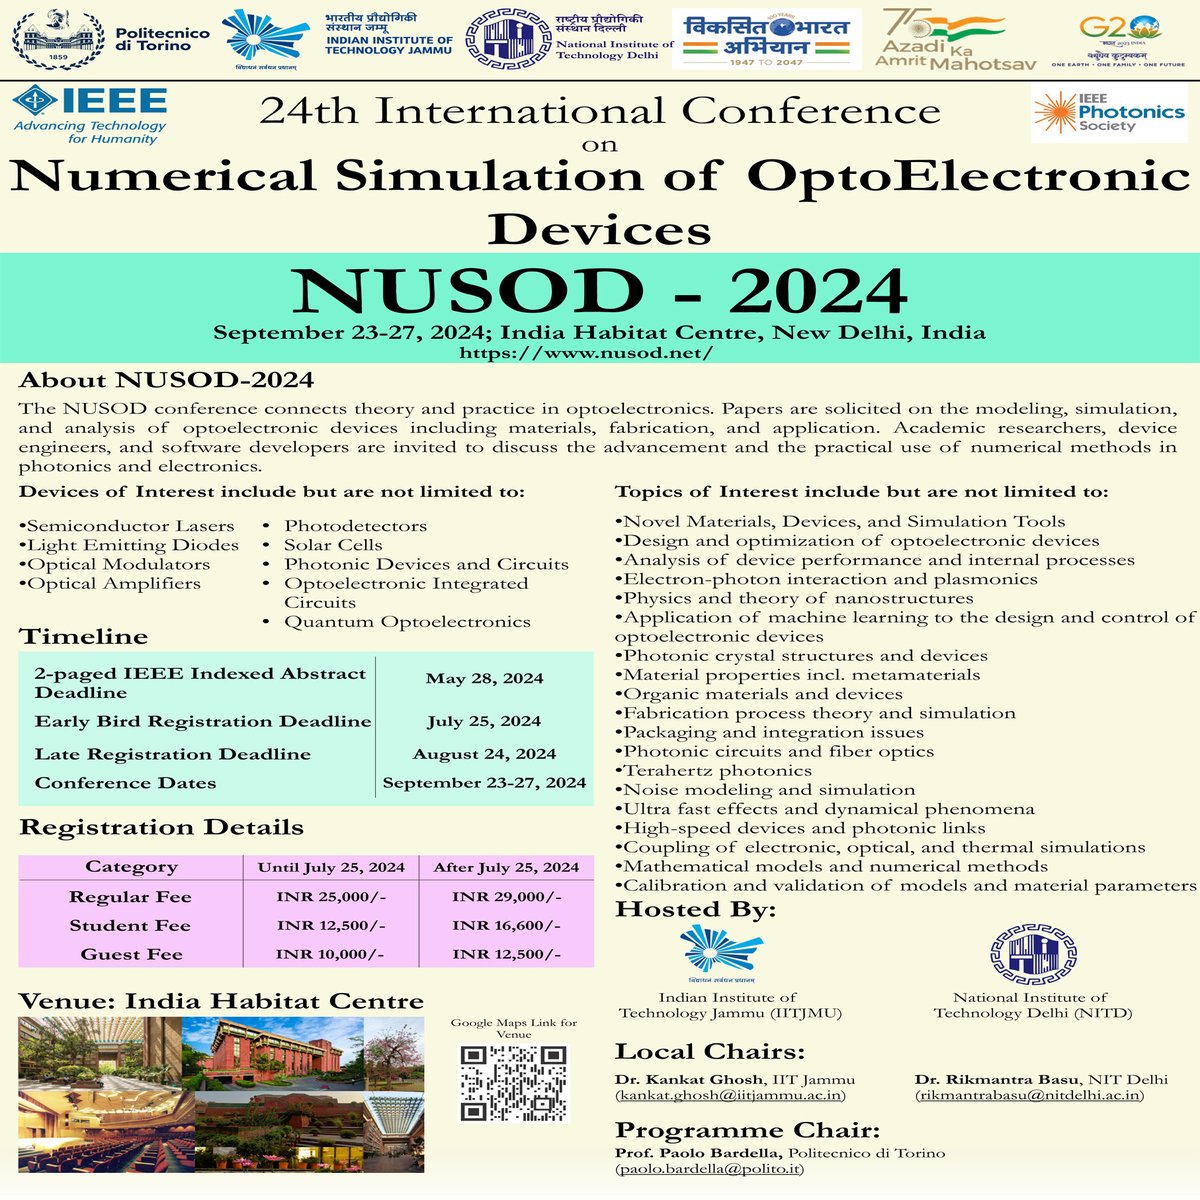 First time global conversation on opto-electronics at the 24th NUSOD 2024 in India, hosted by NIT Delhi and IIT Jammu. Visit nusod.net for more information and registration details. For more info: facebook.com/share/p/jRQMYJ… @PMOIndia @EduMinOfIndia @directornitd